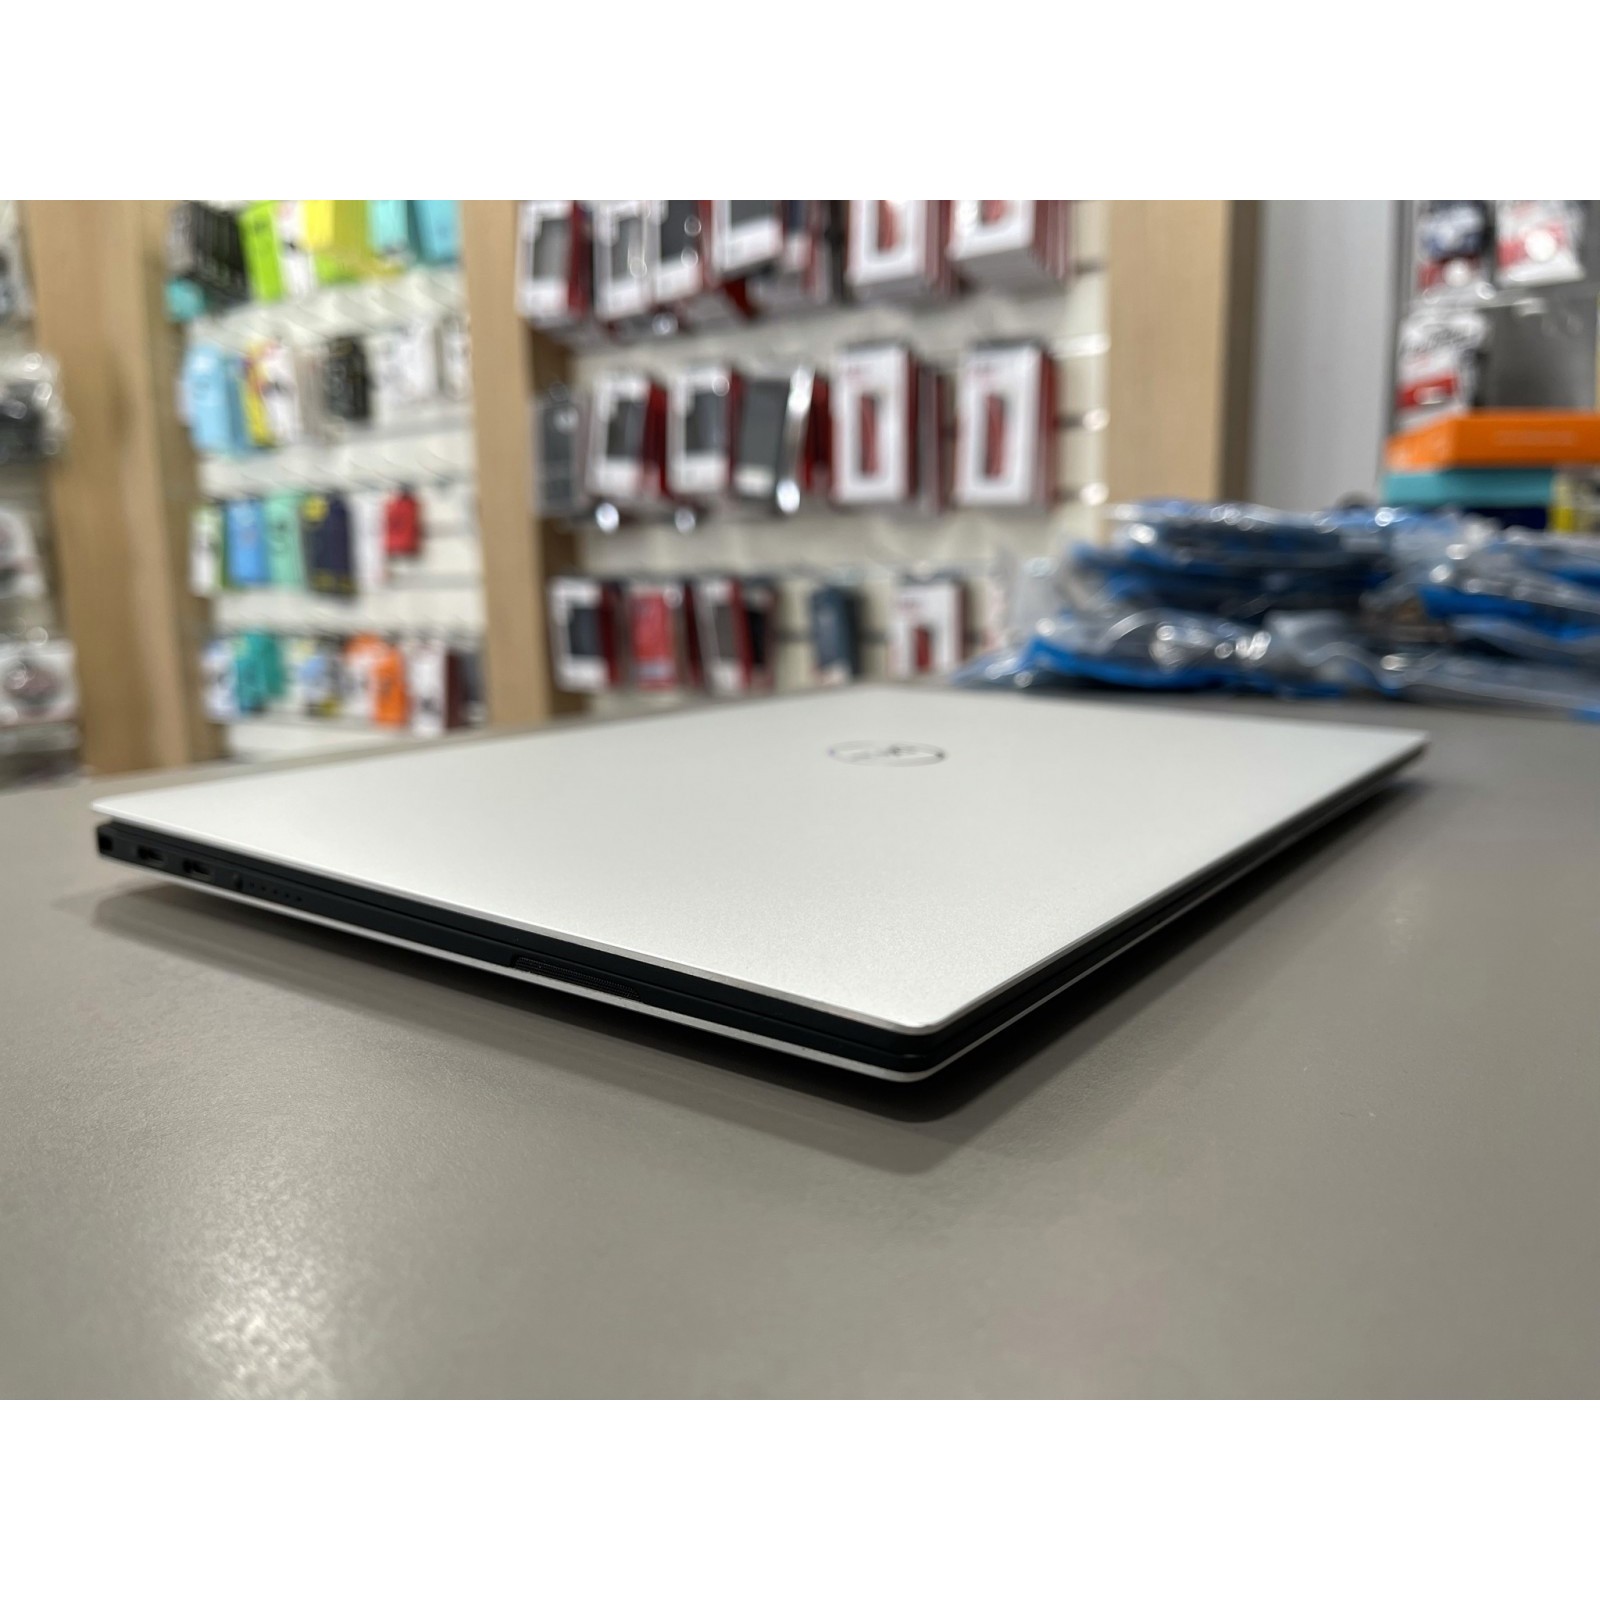 Dell XPS 7390 UHD Touch (i7/16gb/512gb)